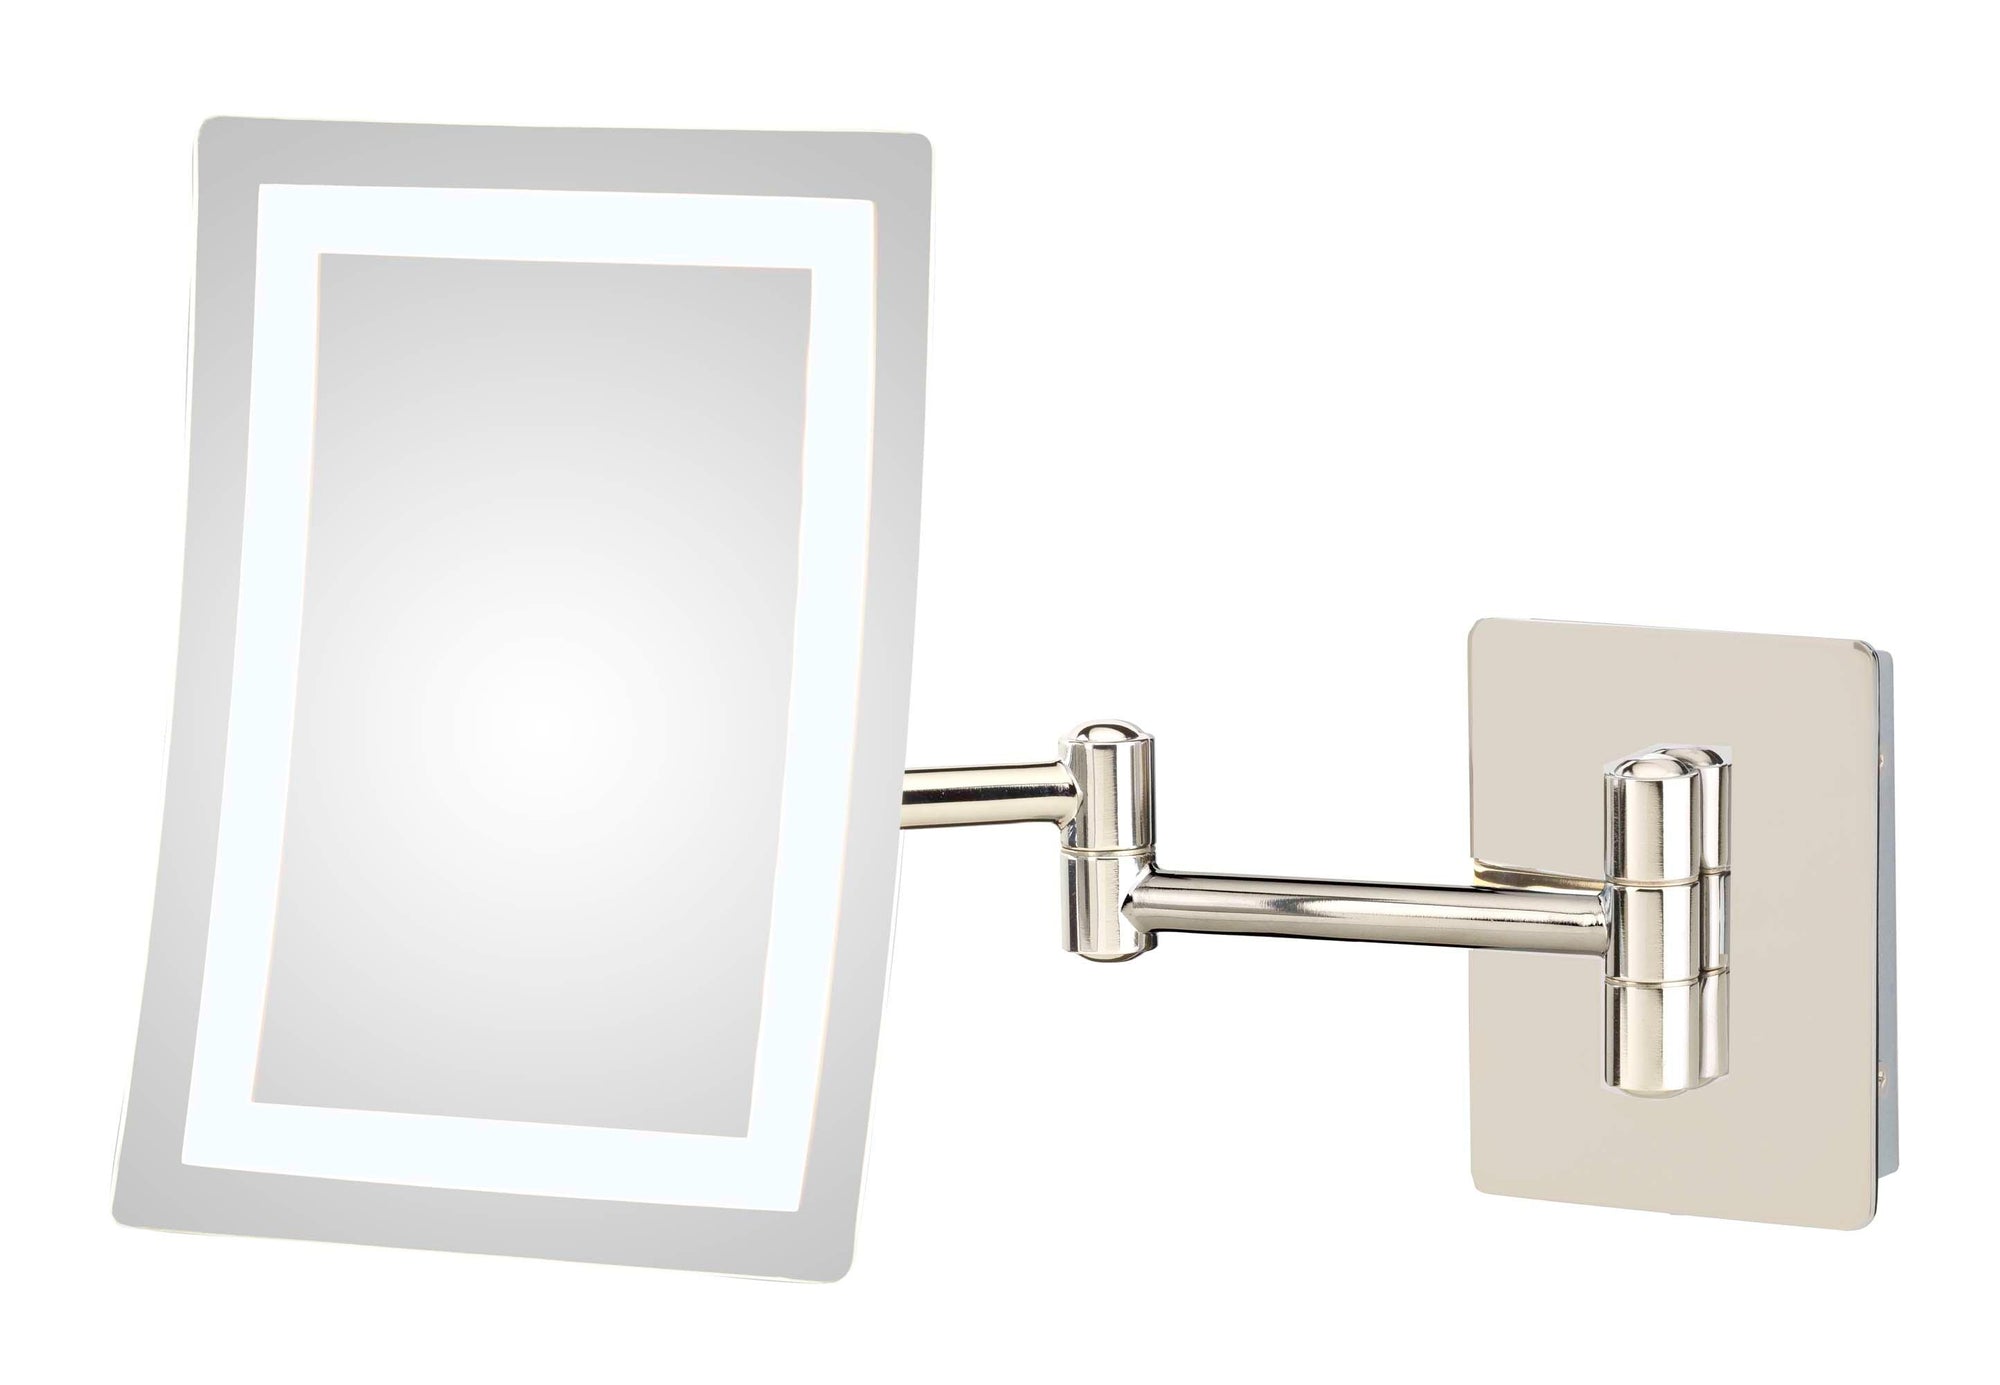 949-2-83HW Single-Sided 3X Rectangular Switchable LED Hardwire Wall Mirror - Hardware by Design